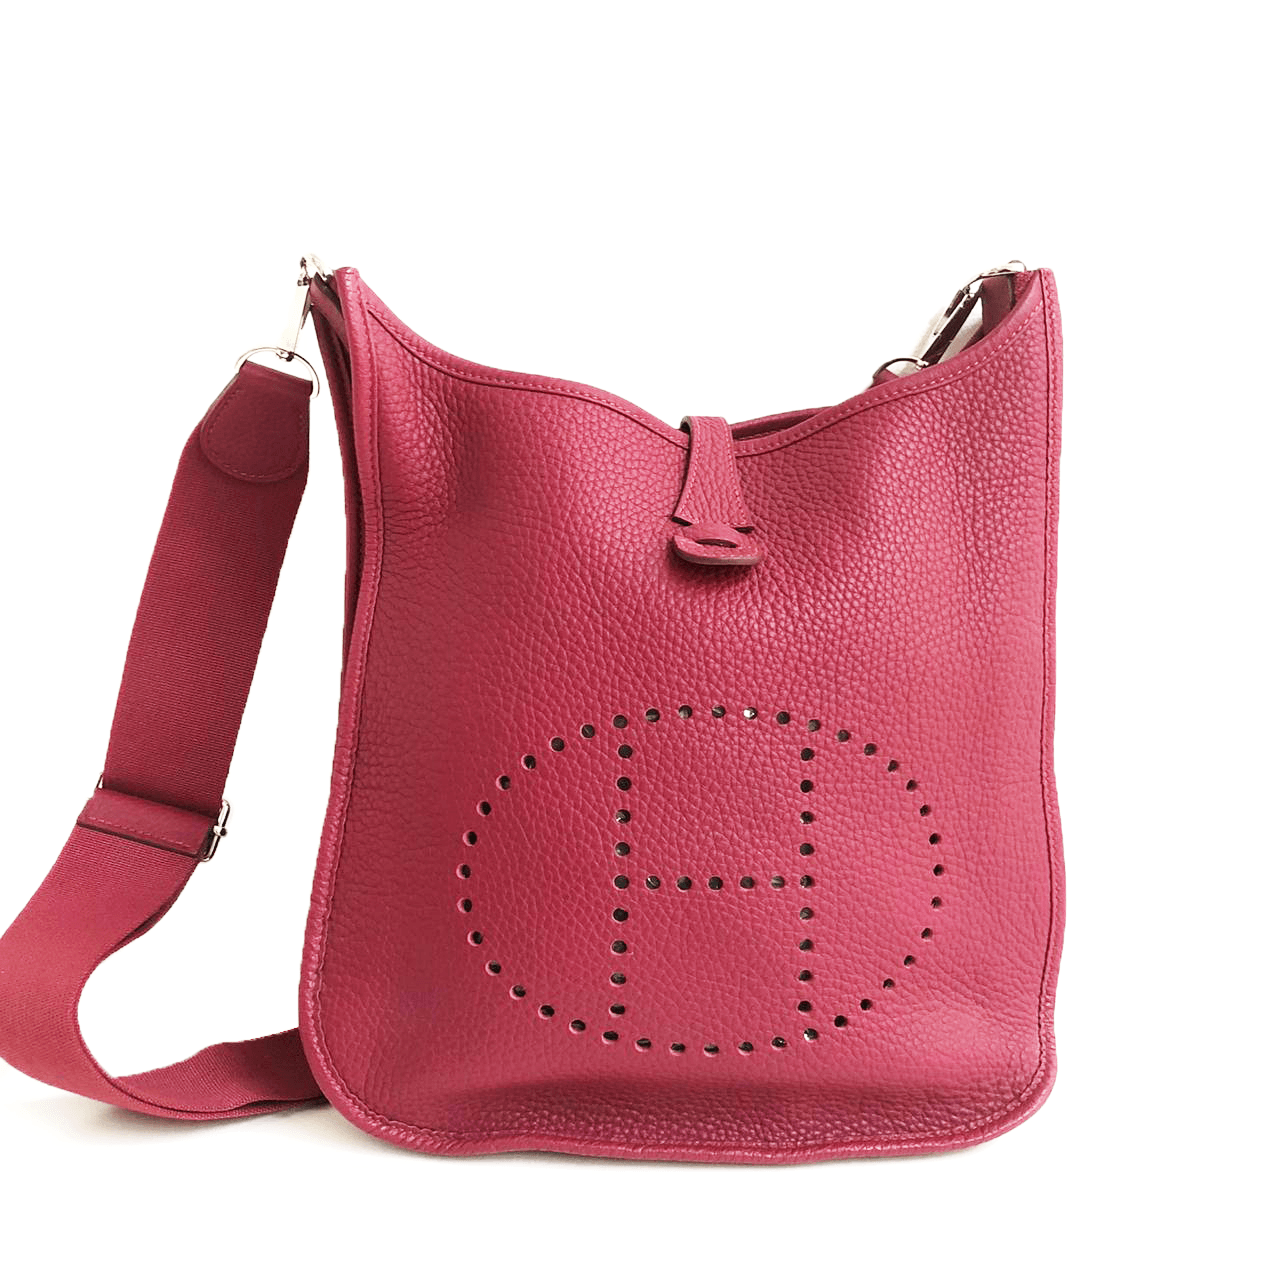 Hermes Pink Clemence Leather Evelyne III PM Bag